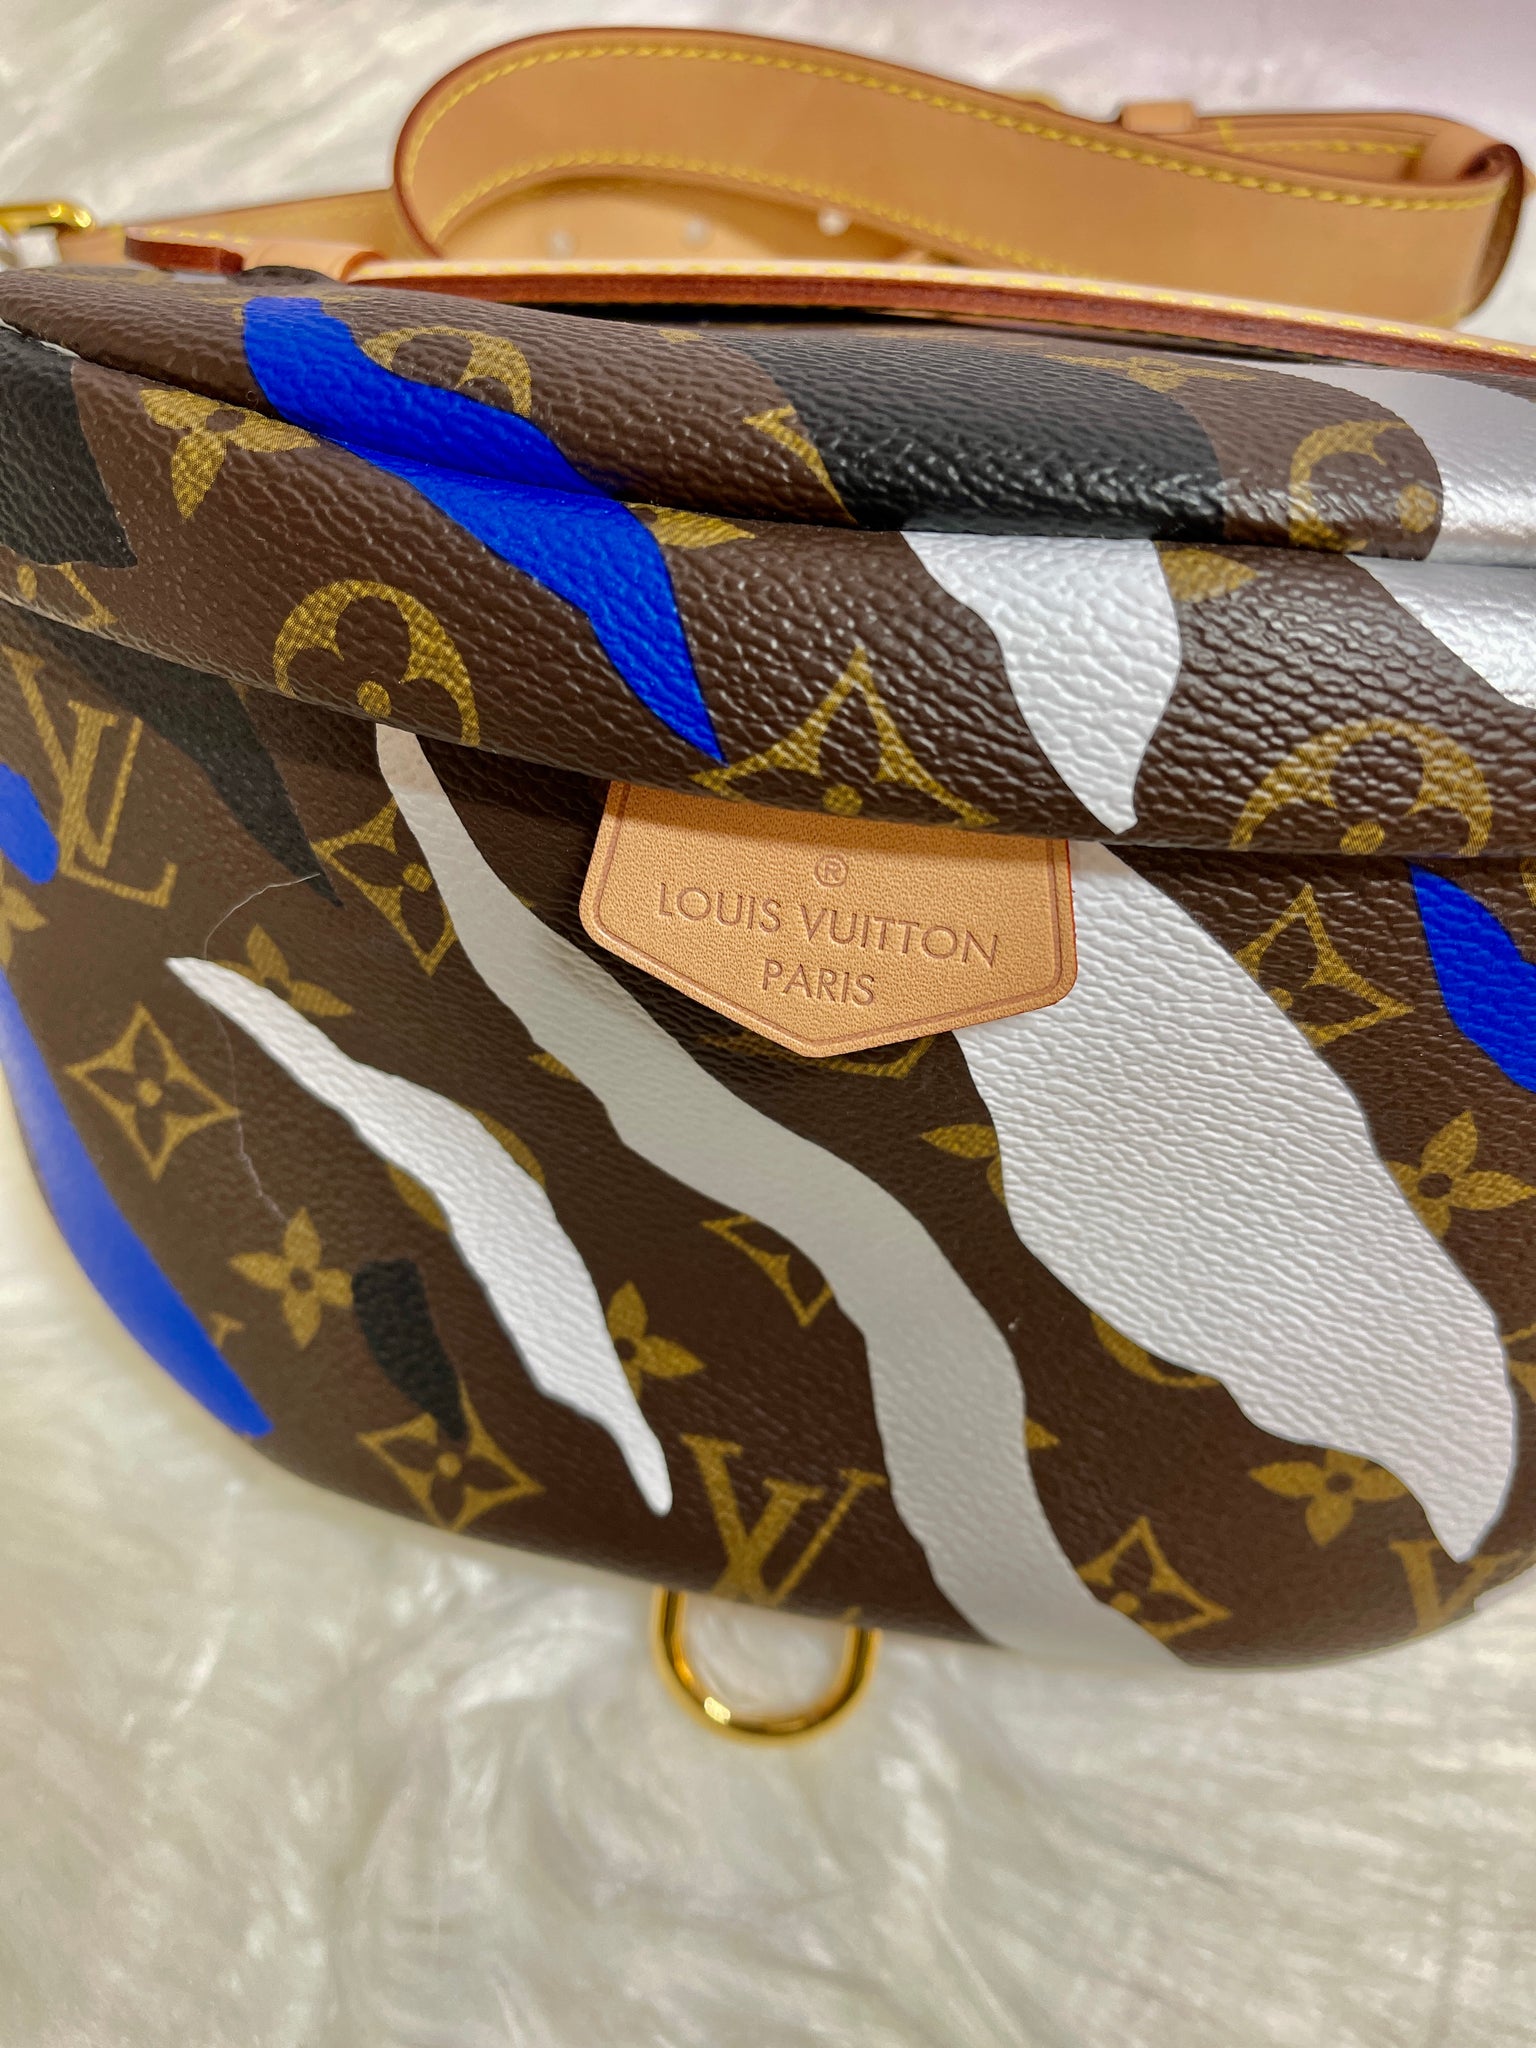 LV Bumbag x LOL limited edition